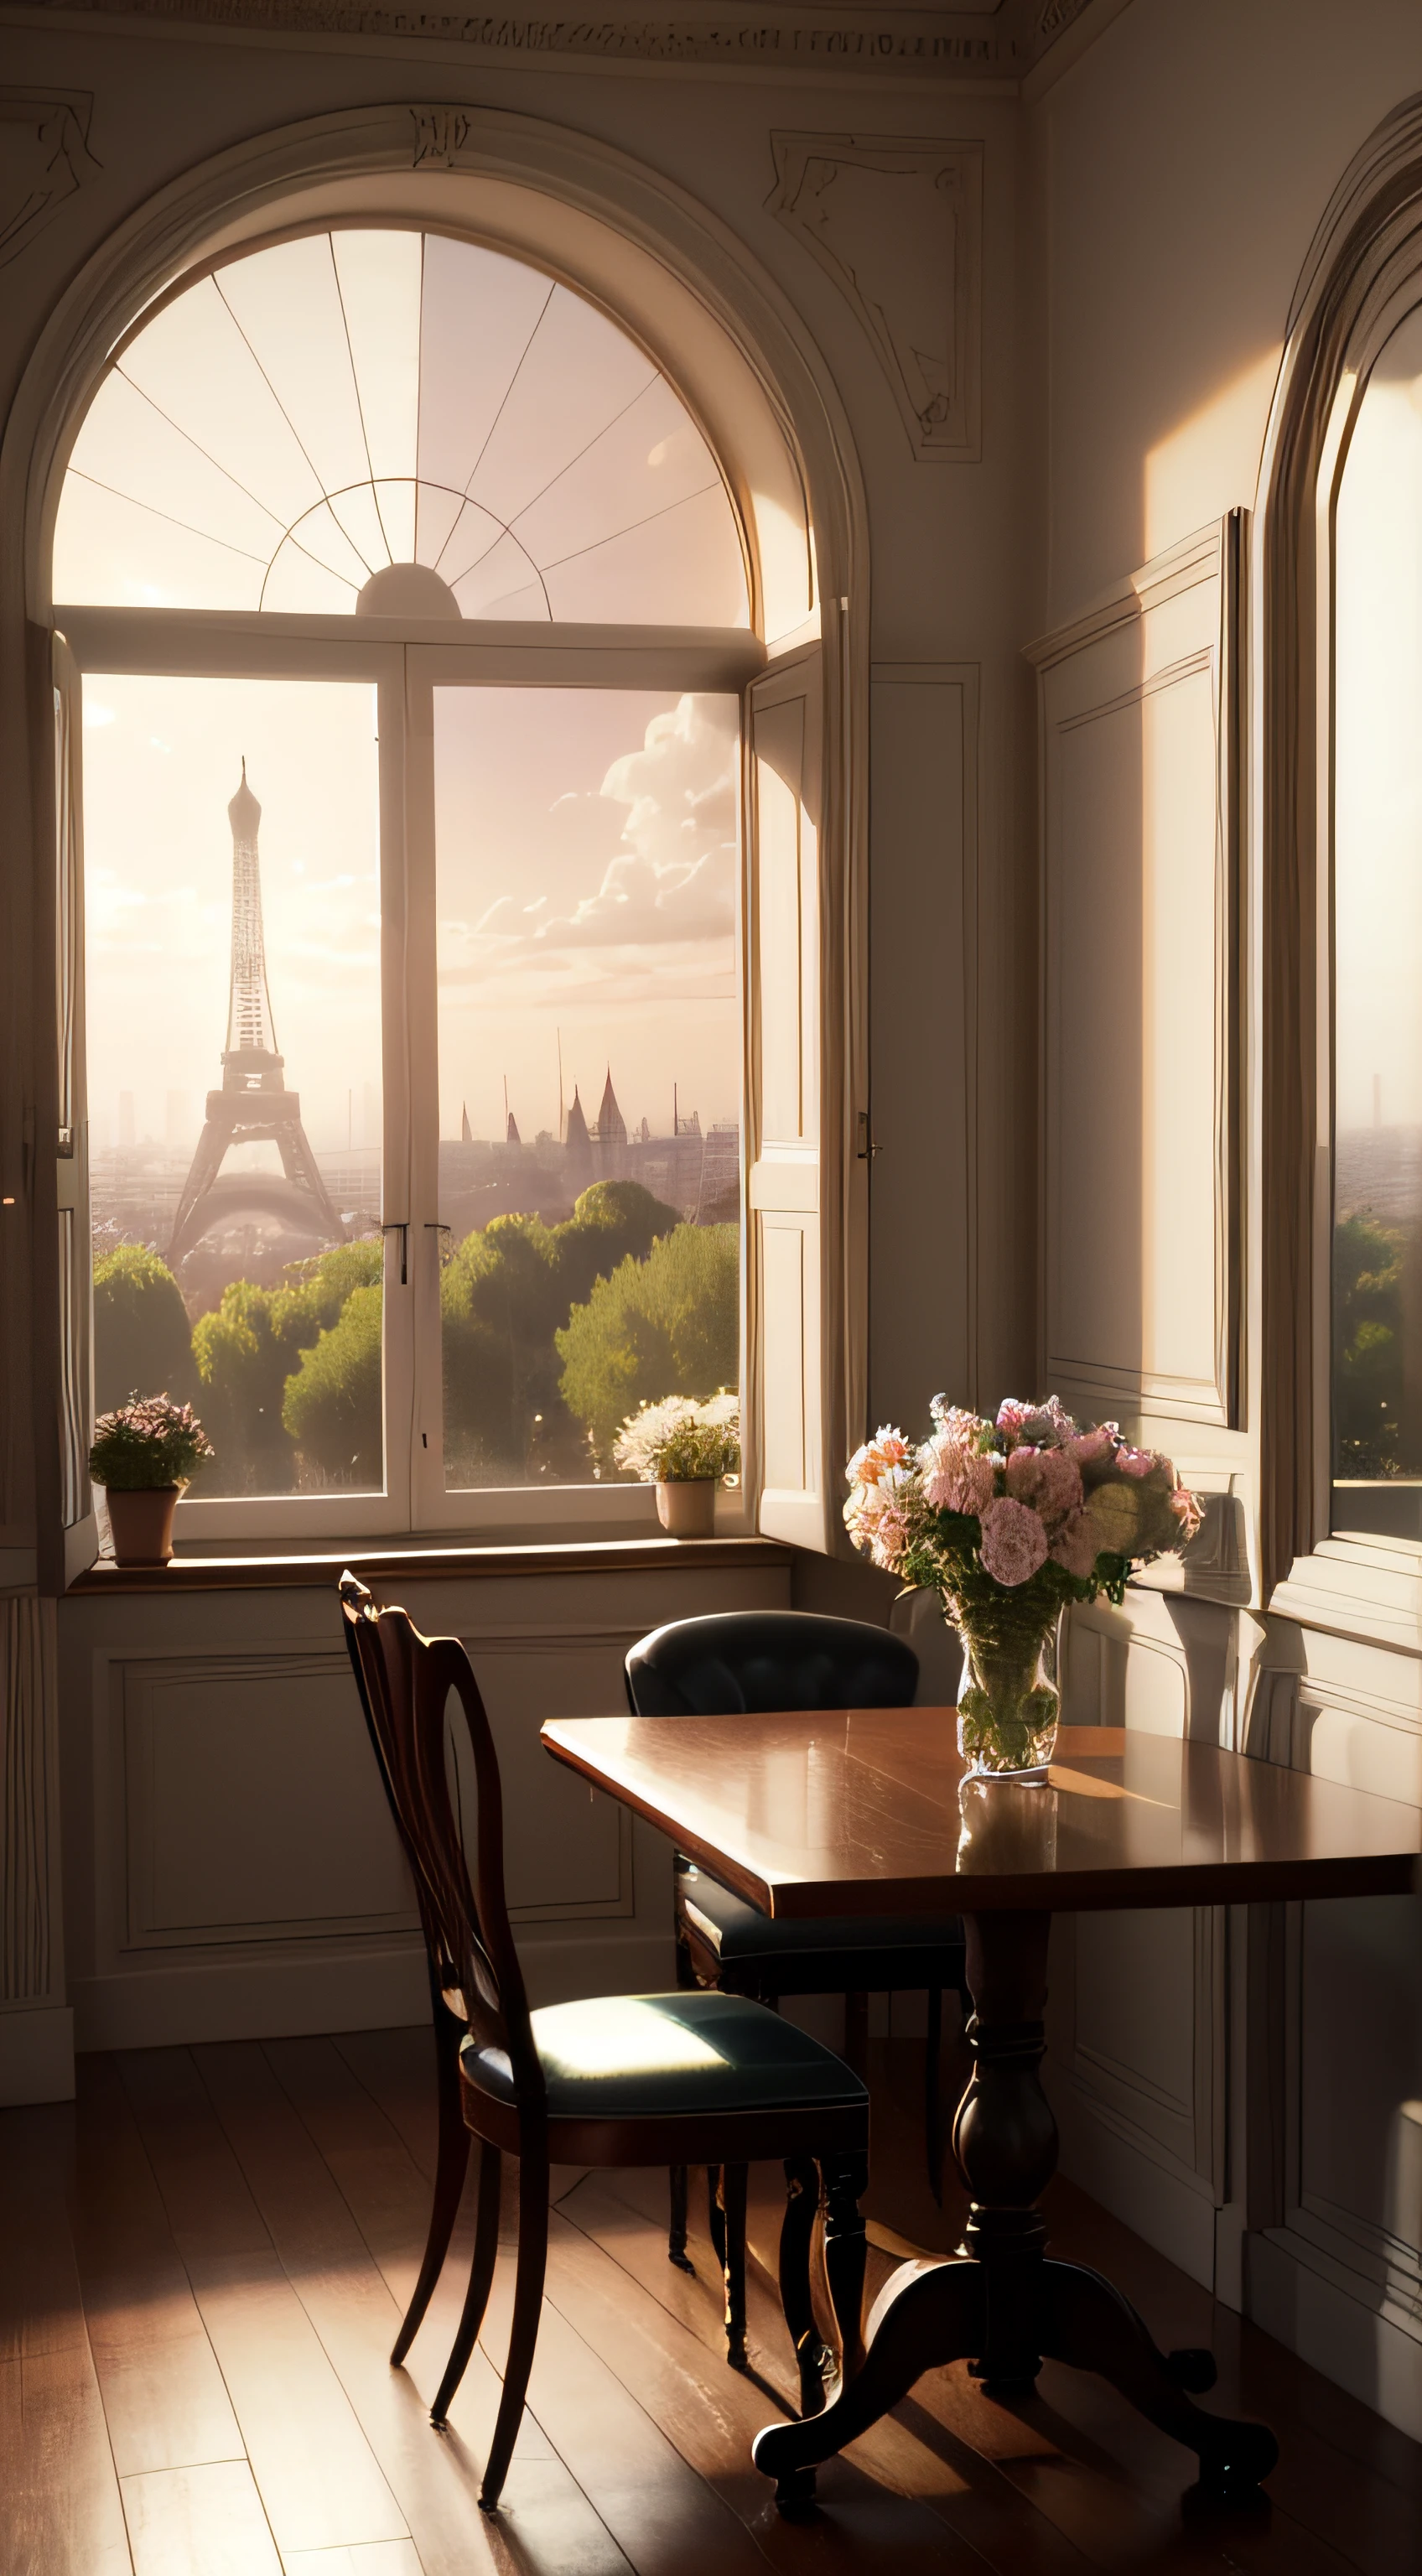 Interior space of a romantic and classic Parisian dining room decorated with many flowers, with several classic tables and chairs, Manteles elegantes con arreglos florales de varios colores en las mesas, Art Deco atmosphere with a large window through which you can see a tree and the Eiffel Tower, Elegant atmosphere, Muchos detalles, Lumion 8K Render, Renderizar la arquitectura del motor irreal, Muchos detalles, Romantic cinematic lighting in warm tones, Image in the style of an impressionist oil painting, Mucho, Manet Cézanne,